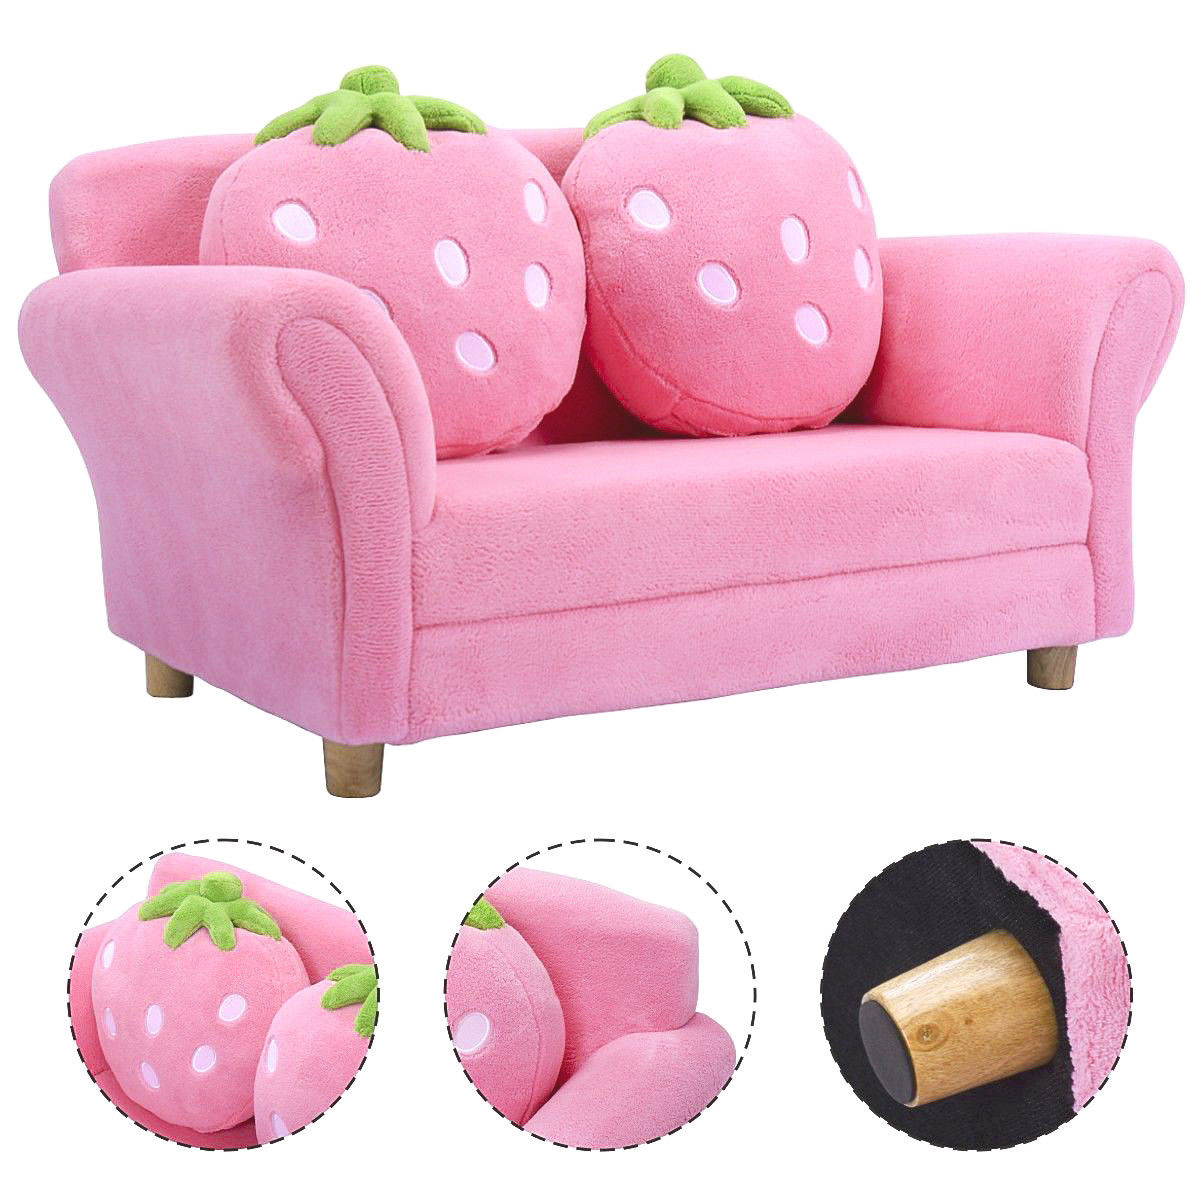 Costway Kids Sofa Strawberry Armrest Chair Lounge Couch w/2 Pillow Children Toddler Pink - image 1 of 10